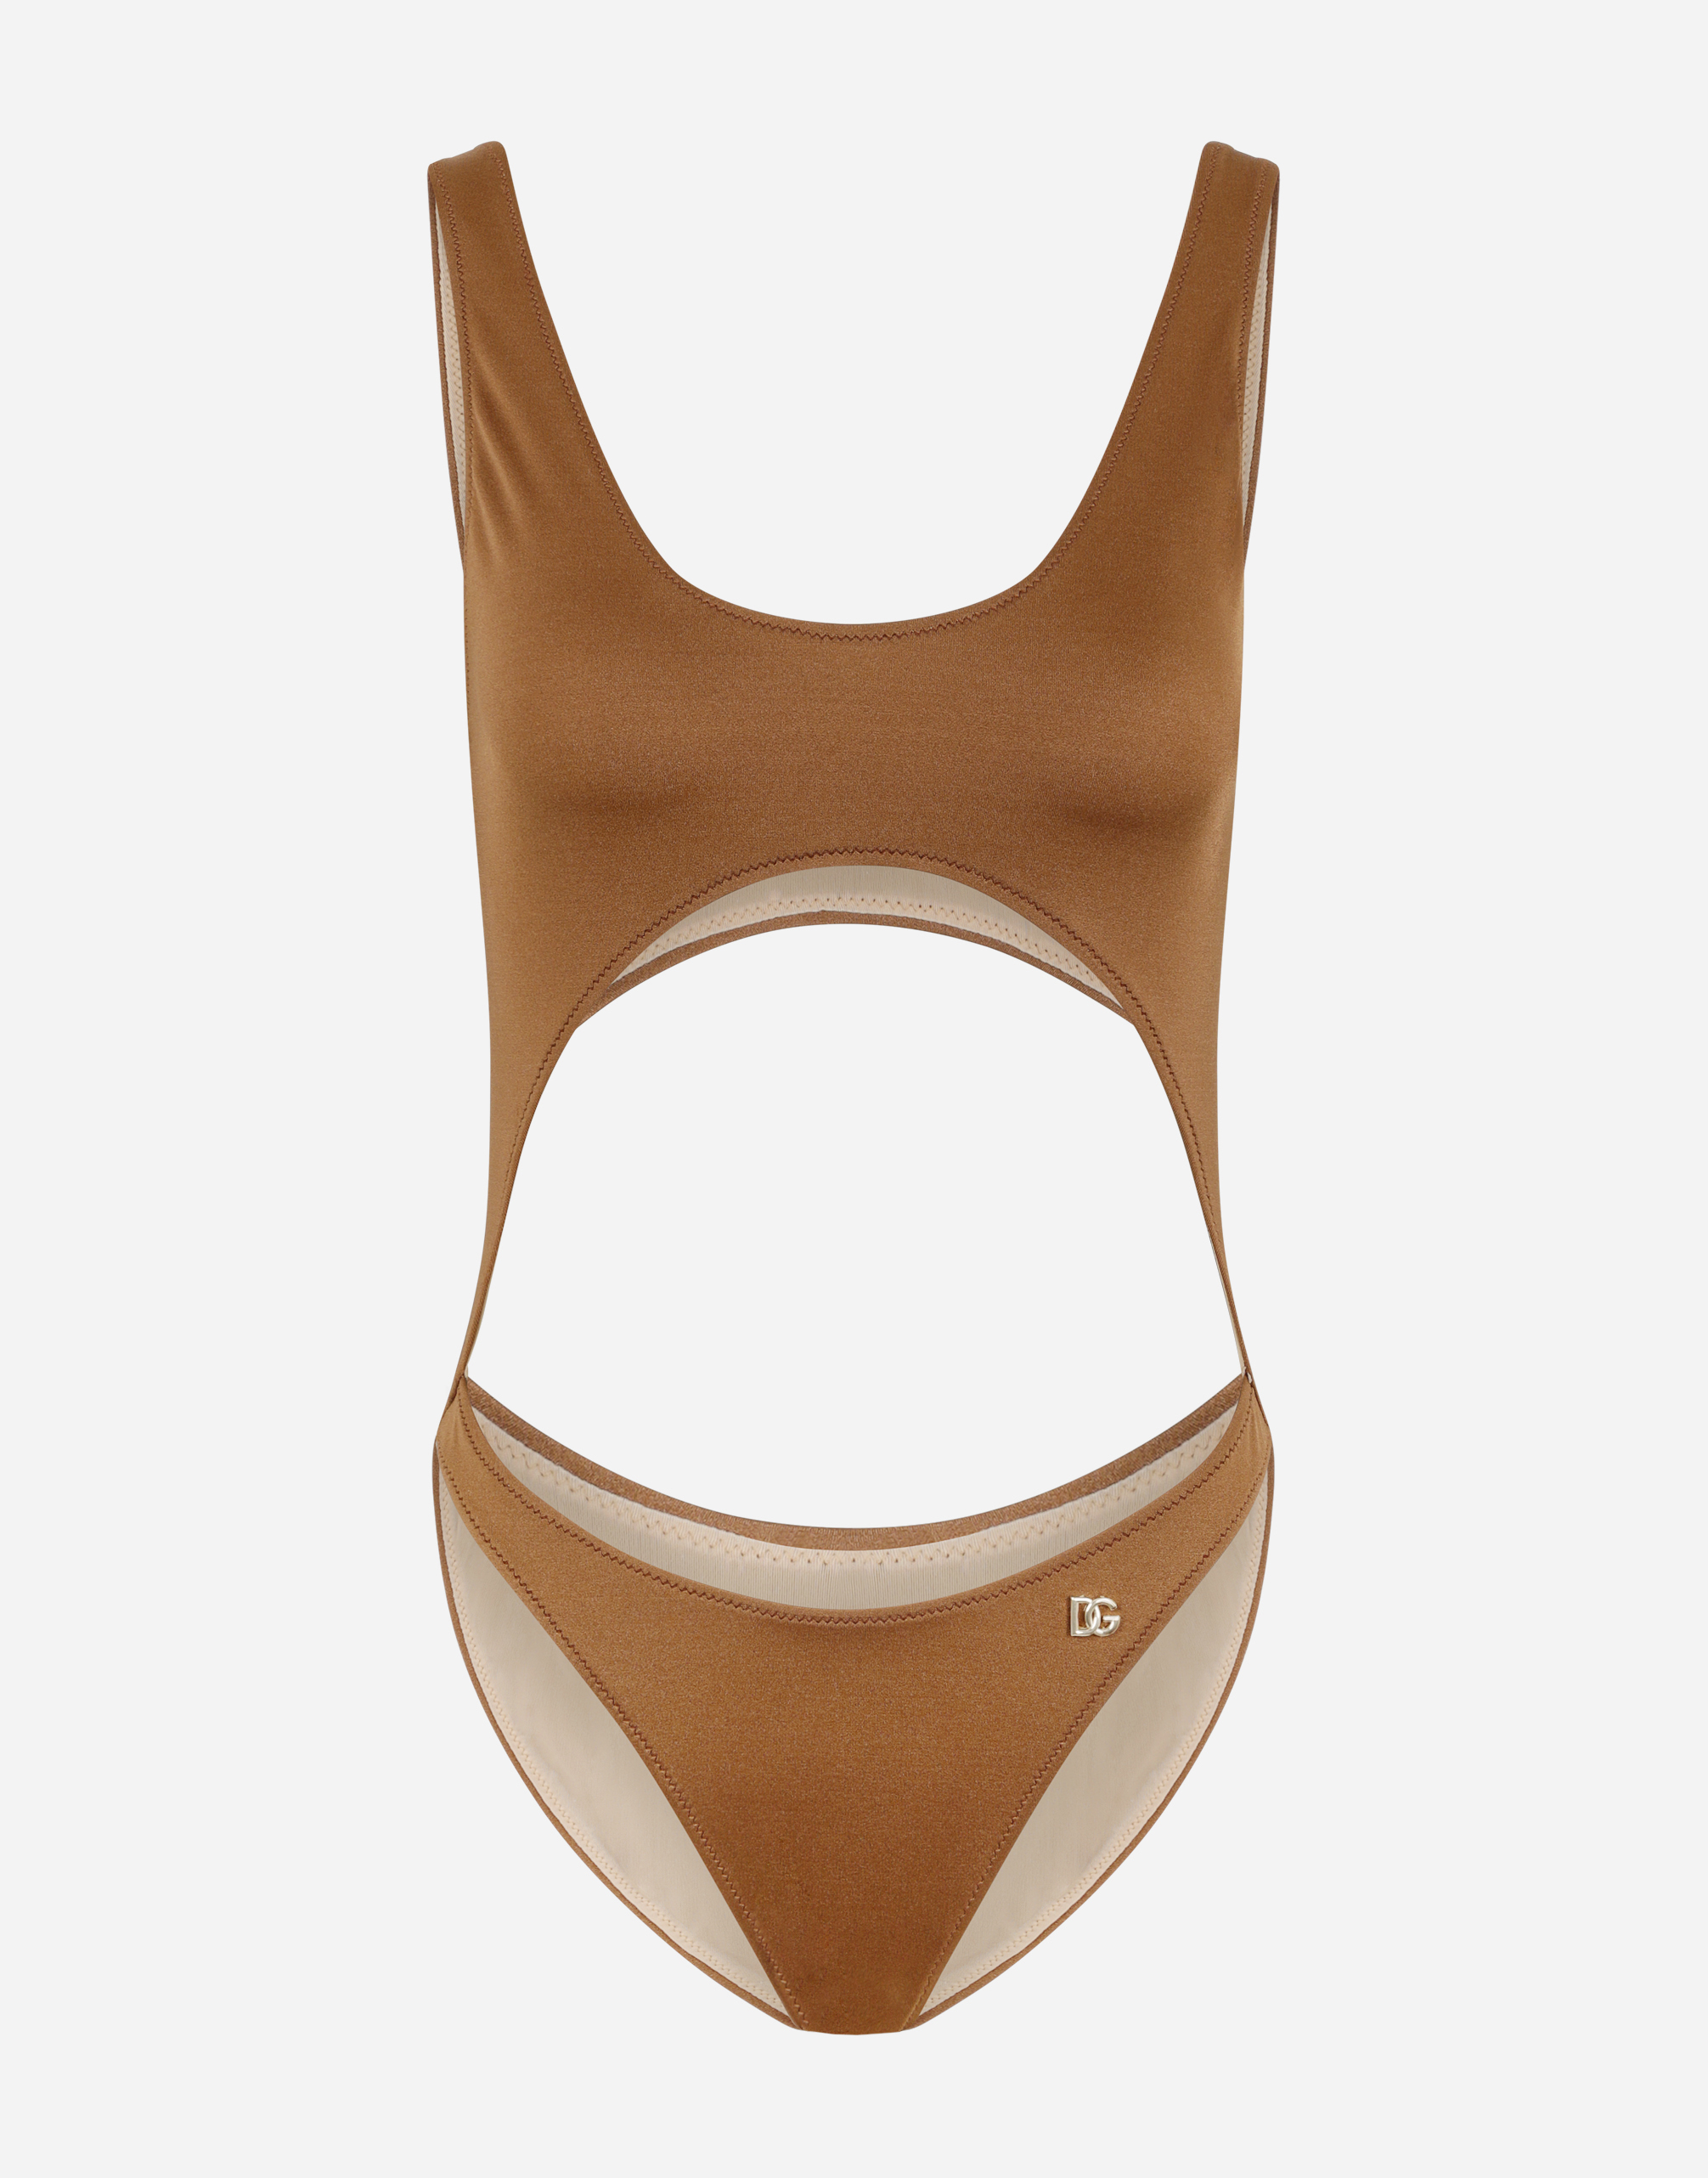 Hublot-style one-piece swimsuit in Brown